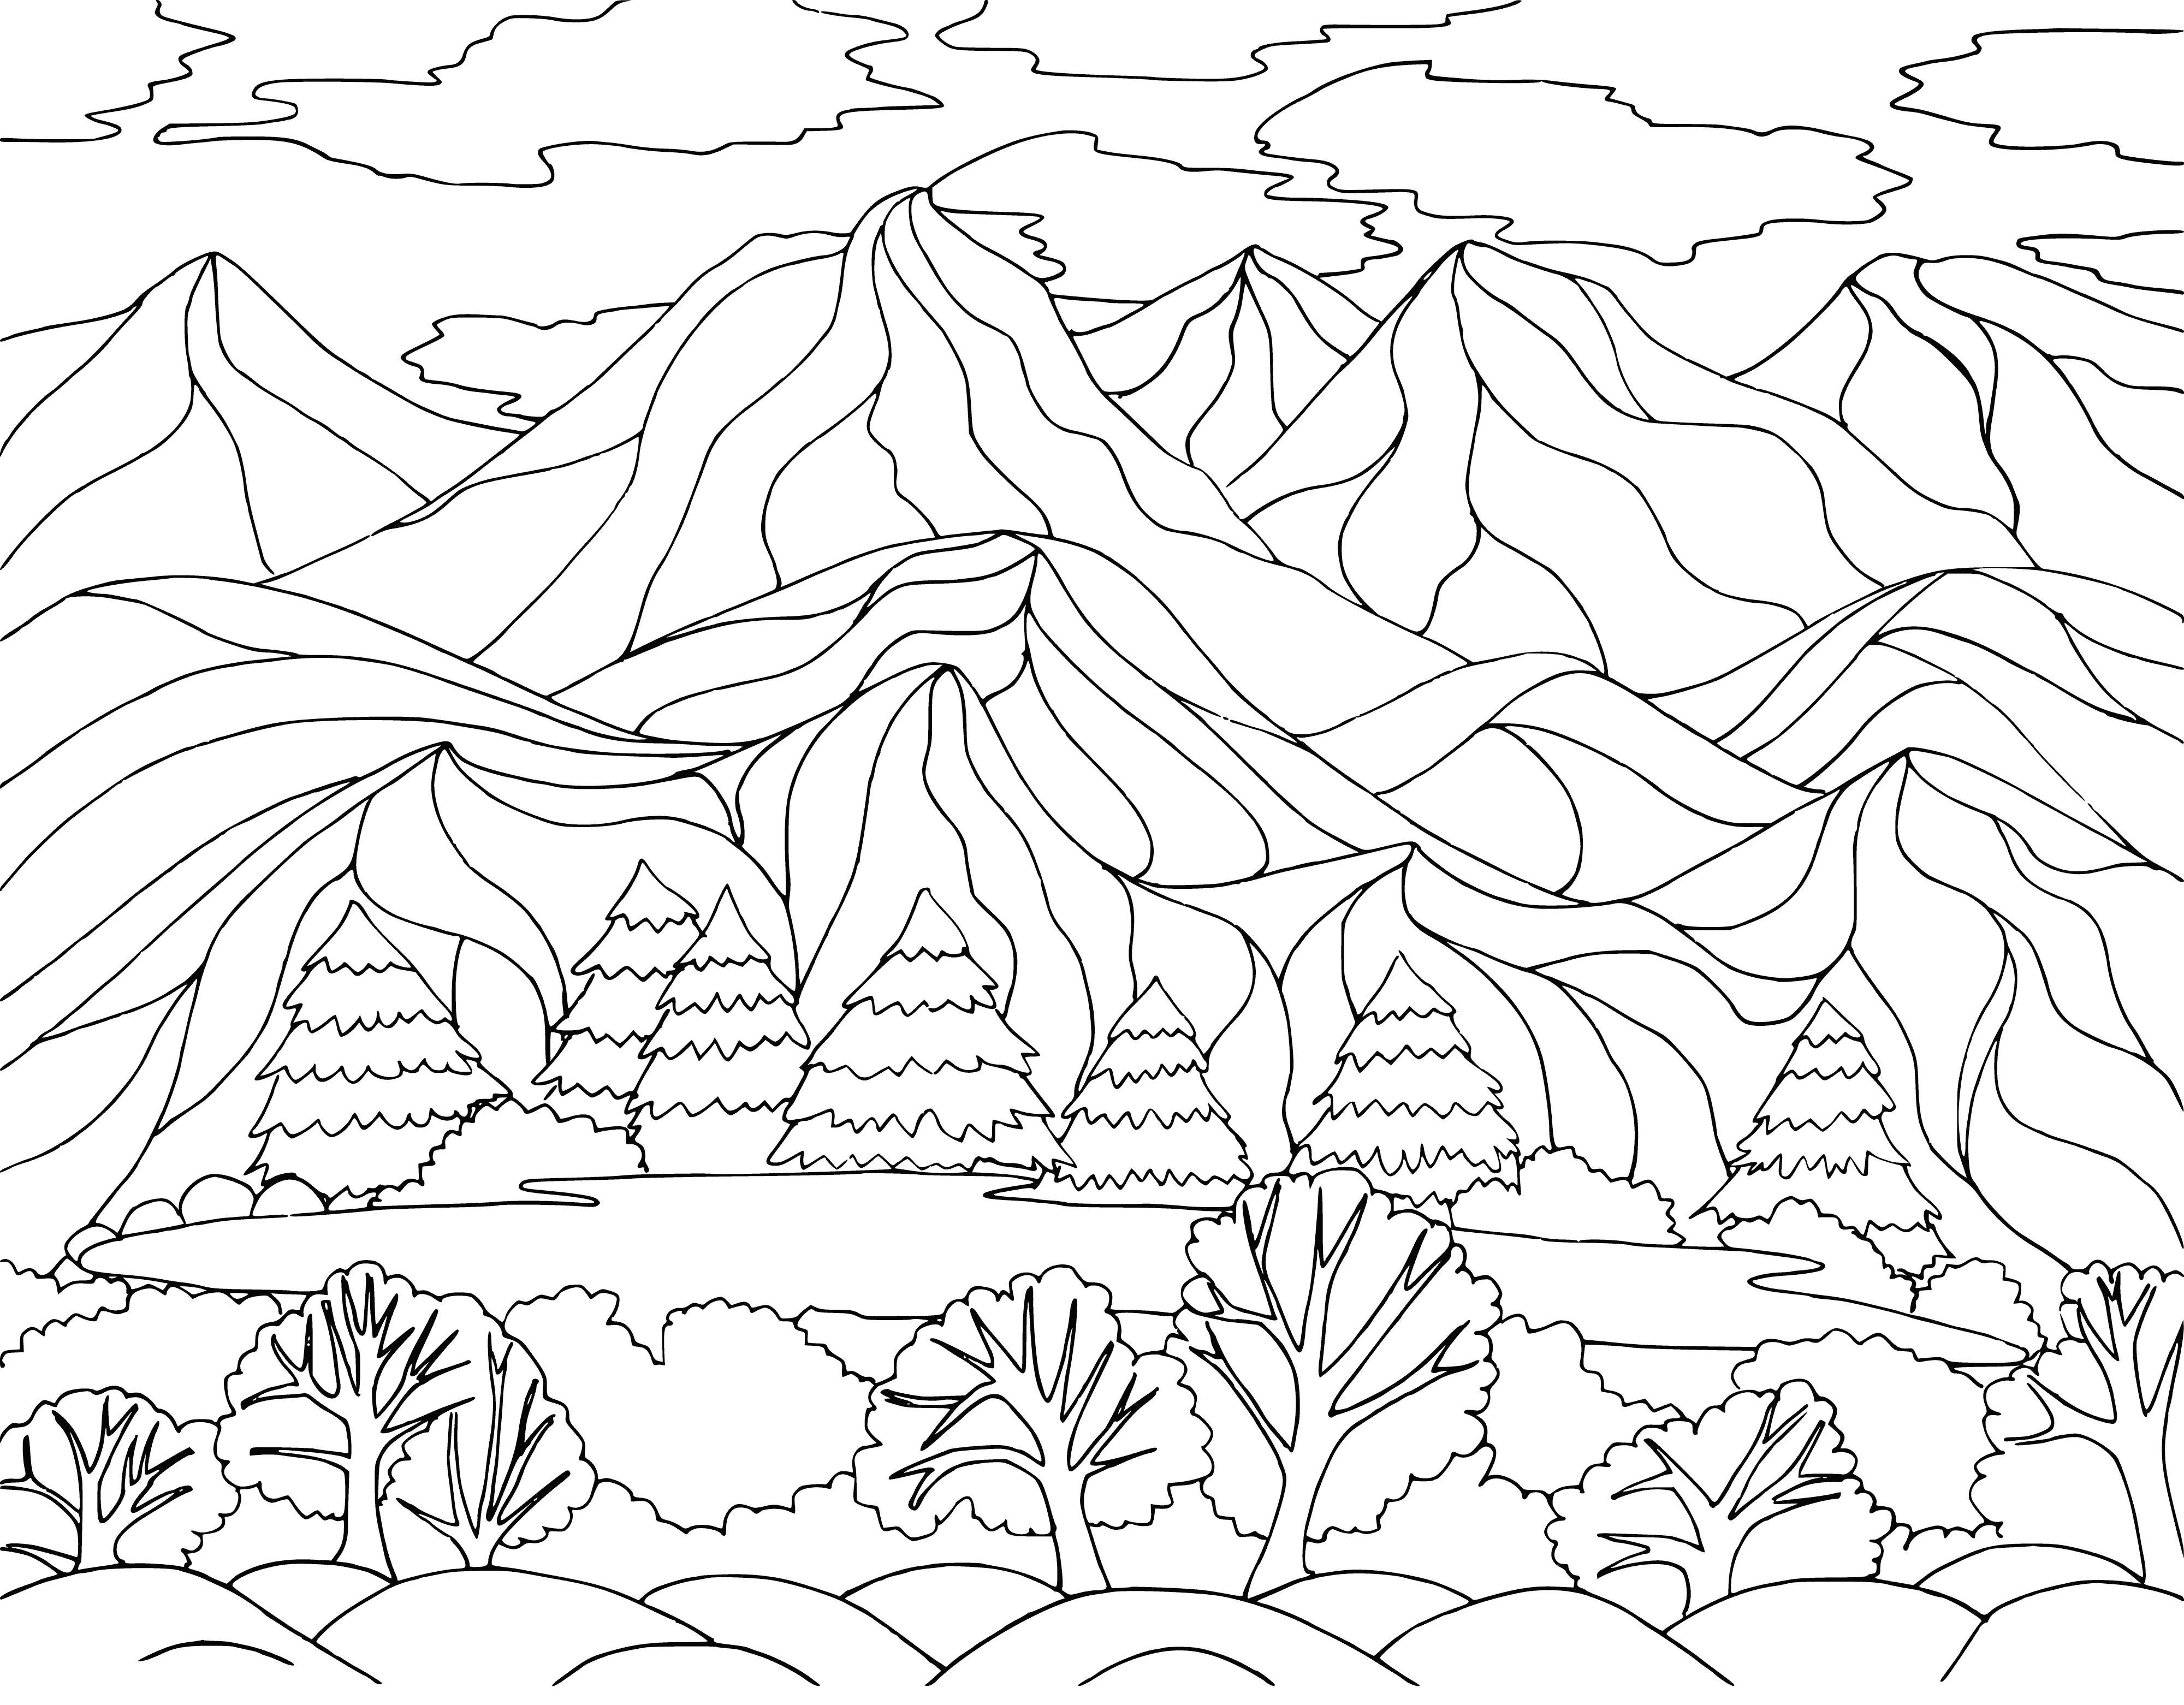 coloring page: Tall & big mountains with snow & trees, pointy & majestic.